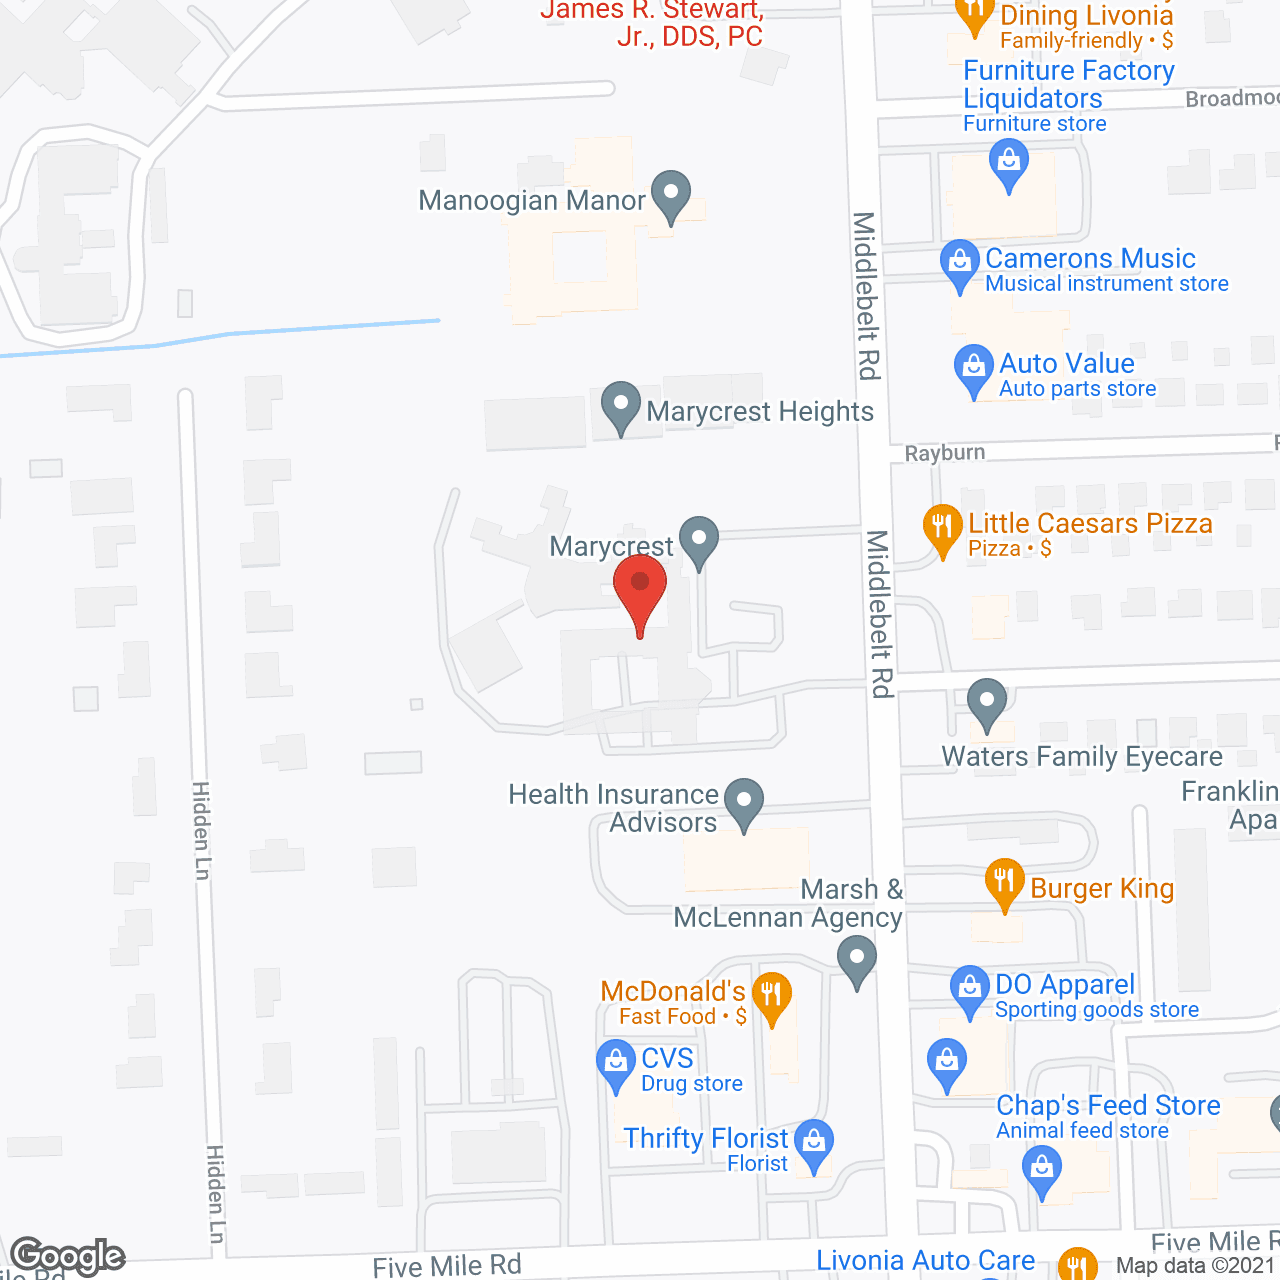 Marycrest Heights in google map